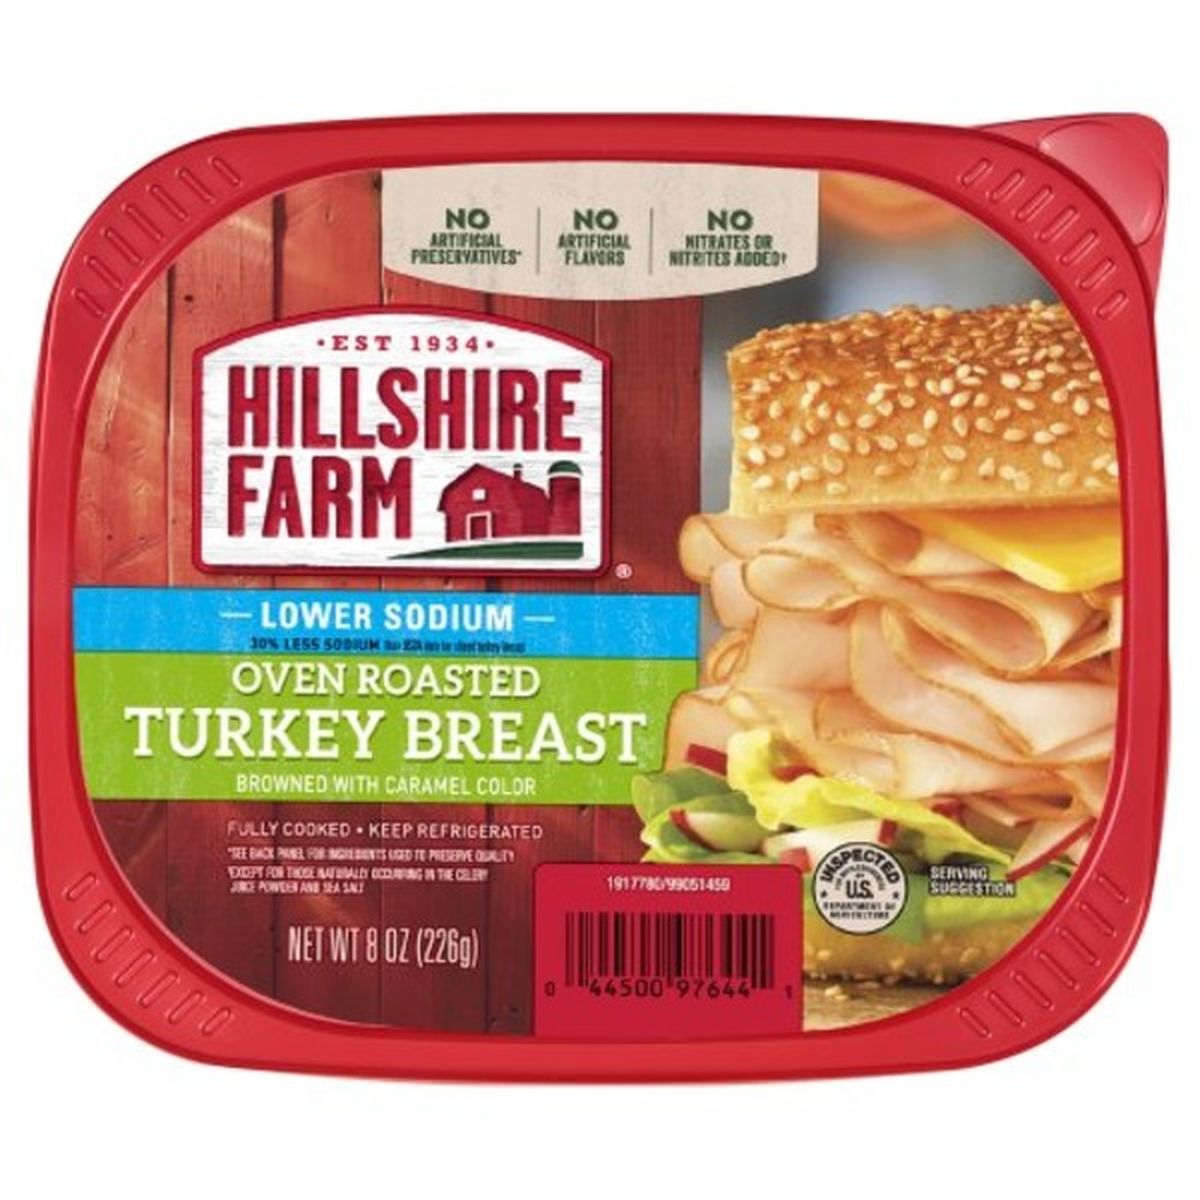 Calories in Hillshire Farm Ultra Thin Sliced Lunchmeat, Lower Sodium Oven Roasted Turkey Breast